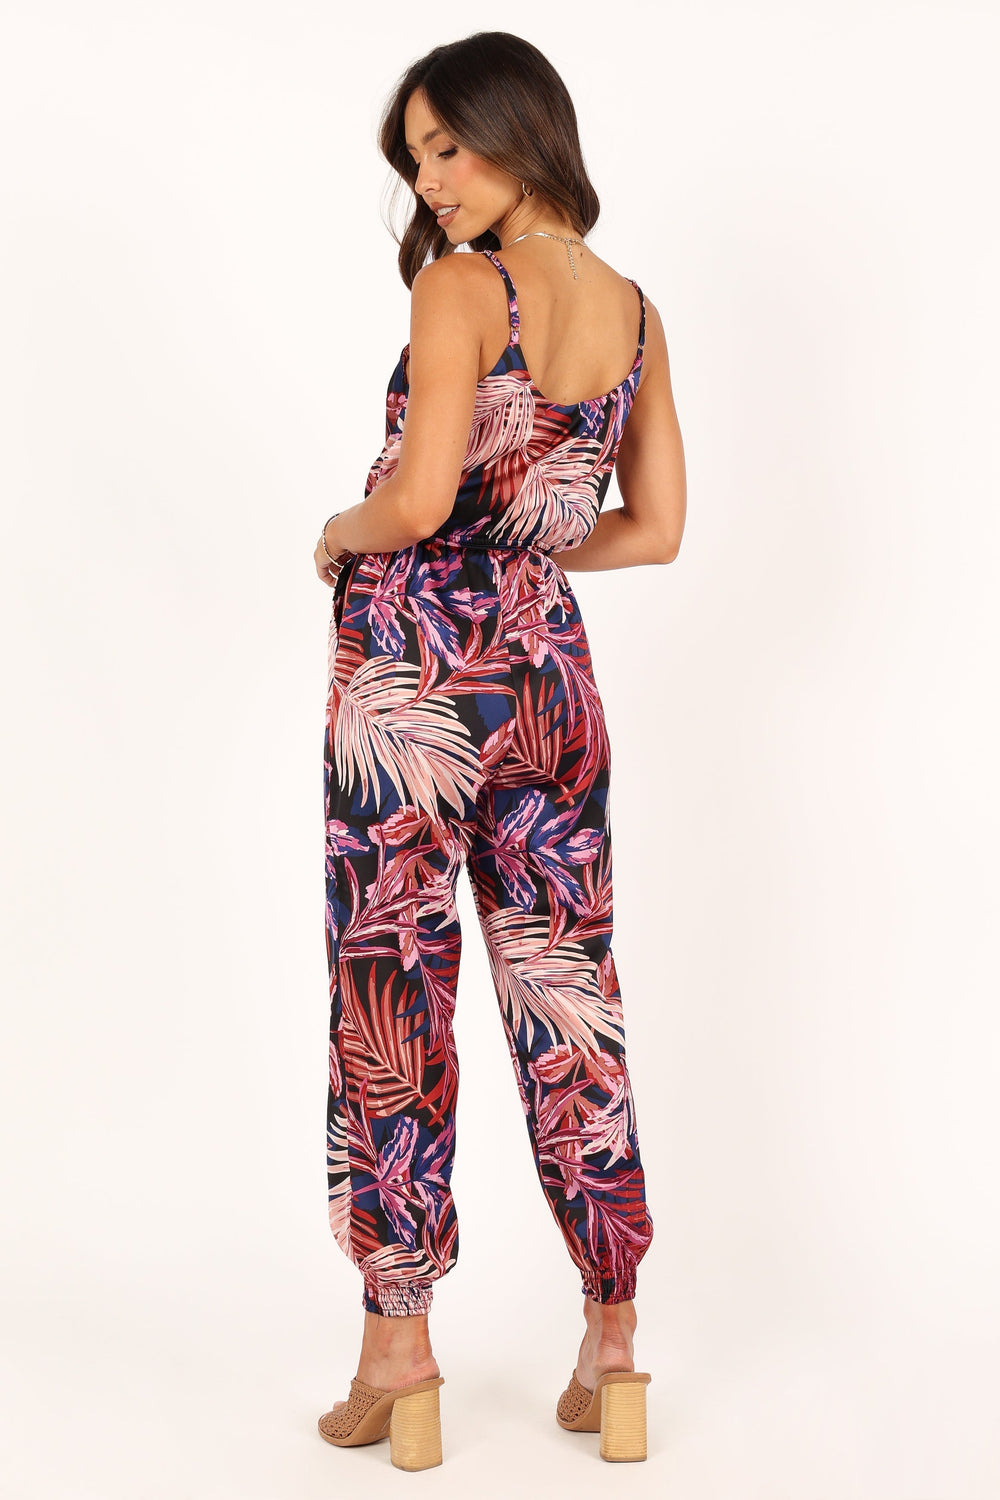 Petal and Pup USA Rompers Praiano Jumpsuit - Palm Print